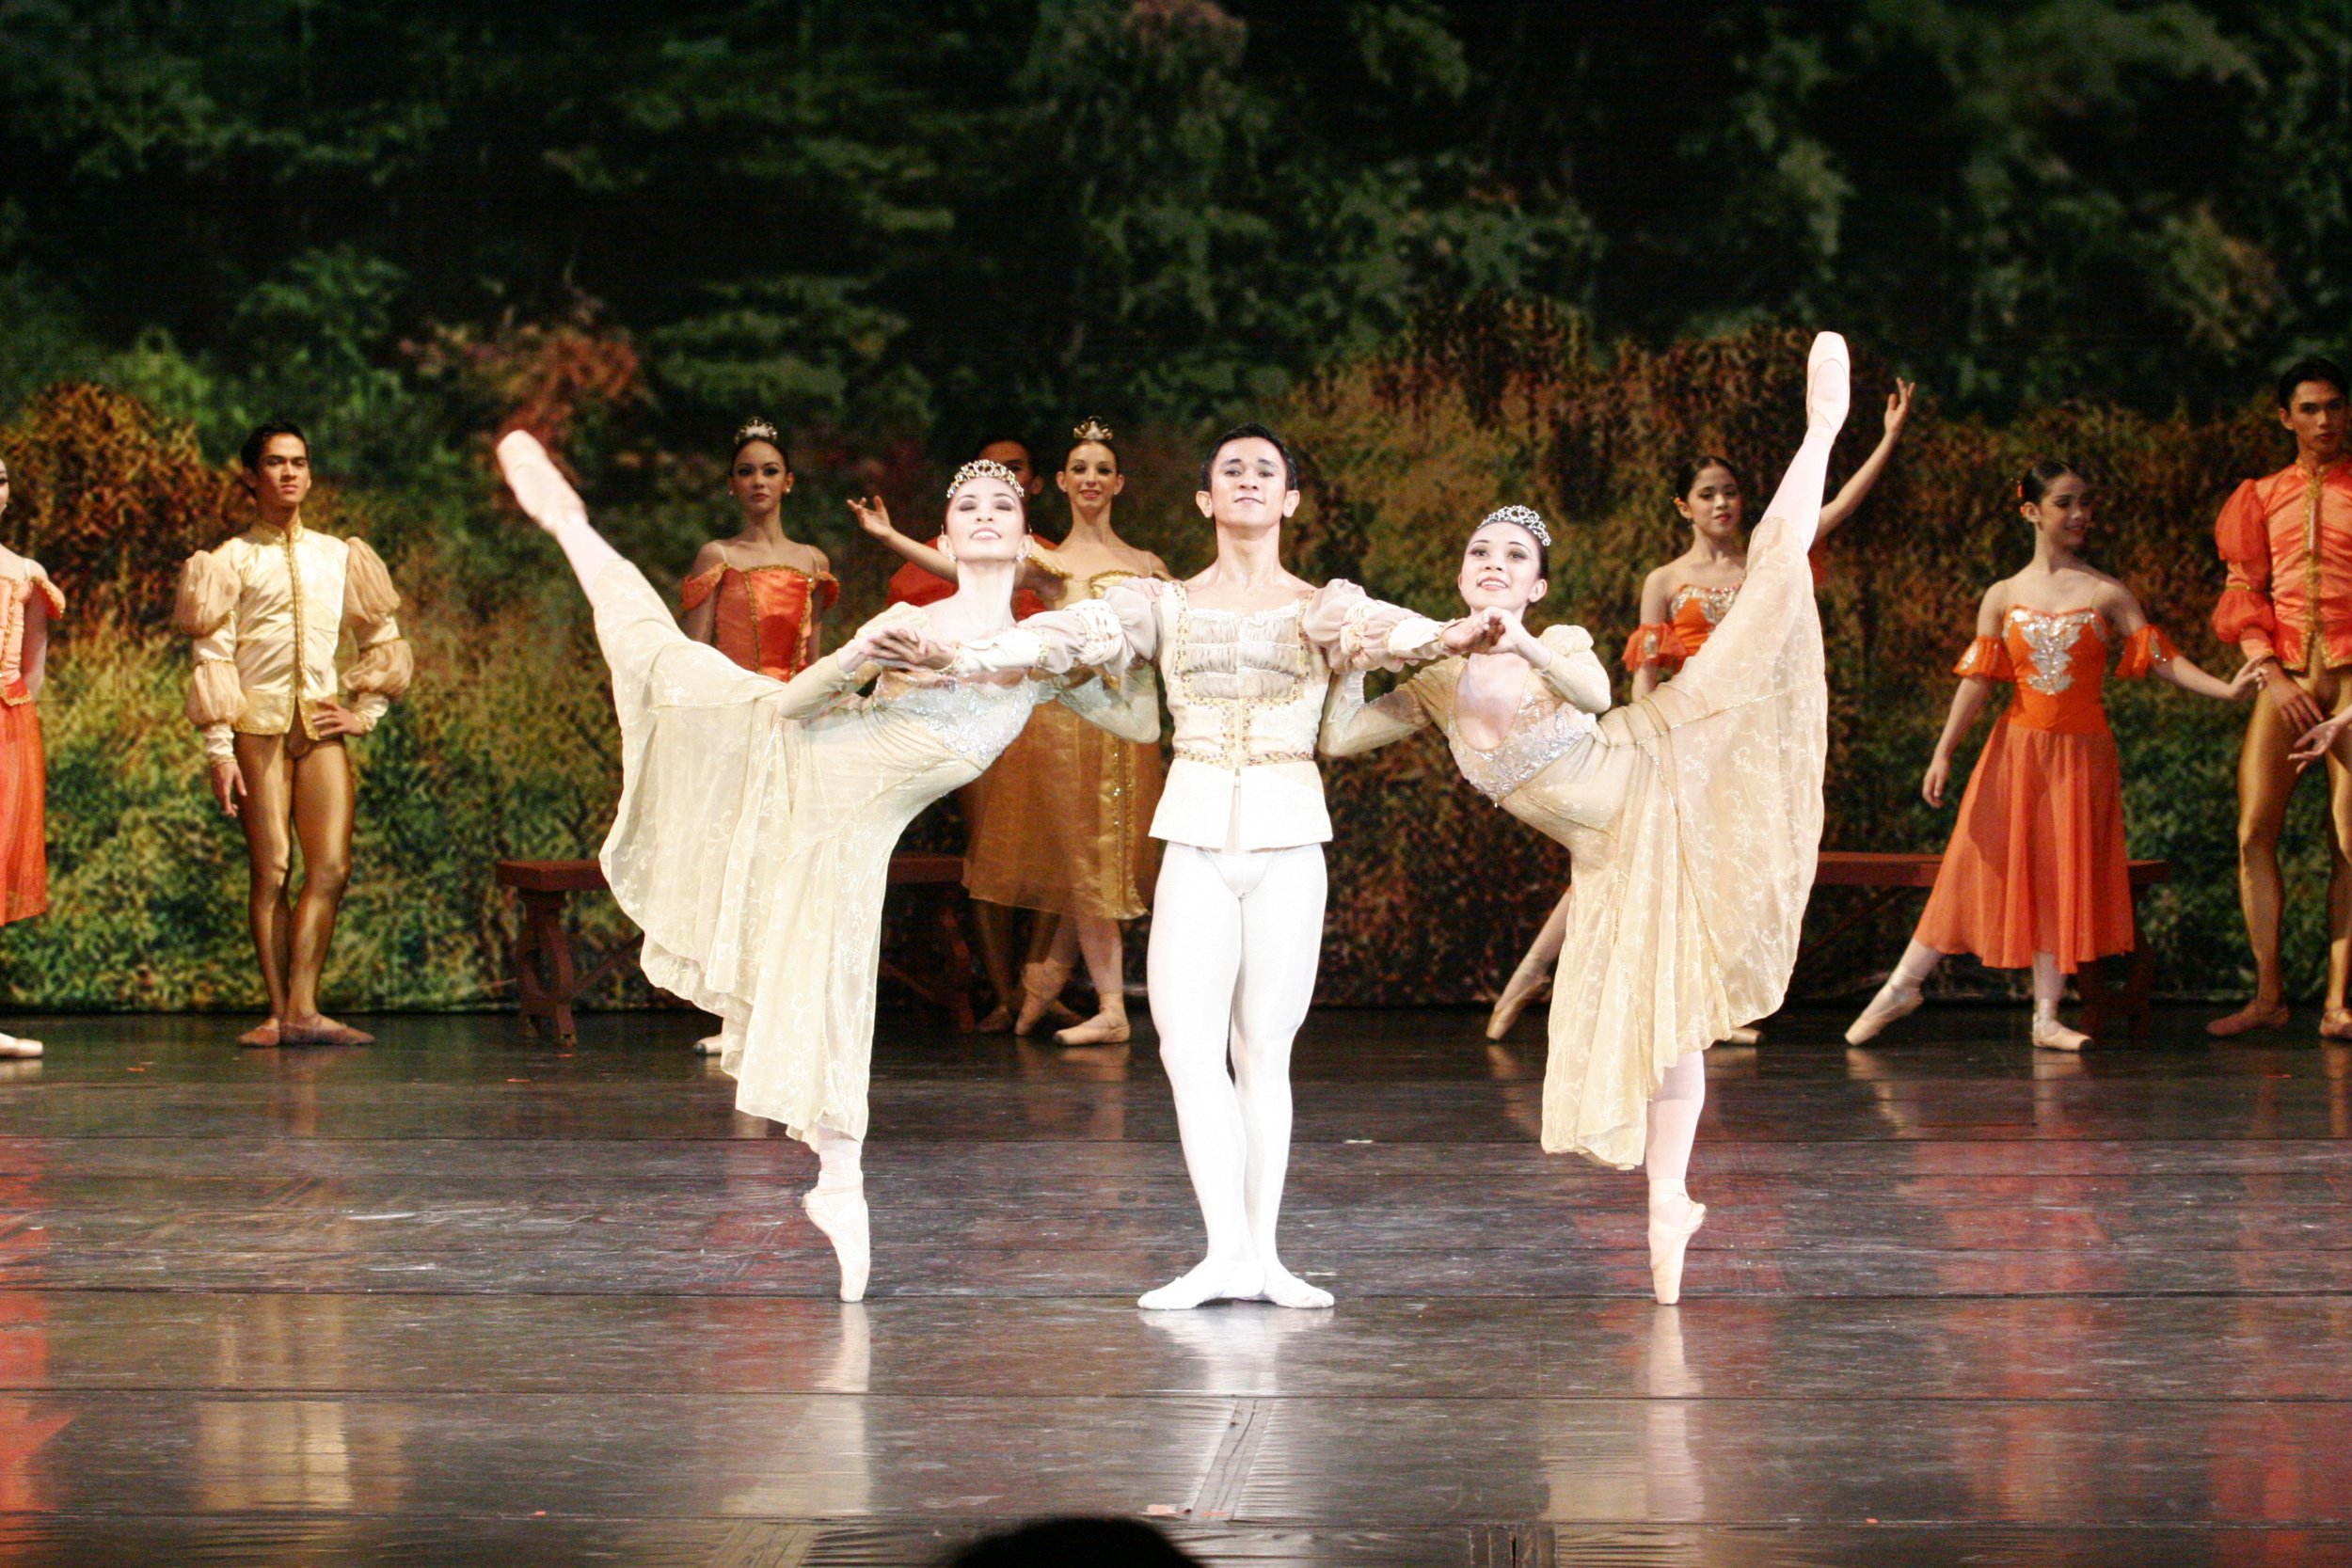    Marian Faustino, Jerome Espejo and Mylene Aggabao are three of a kind in  Swan Lake  (2005) as they dance the Pas de Trois wearing matching outfits in beige. The muted tone uncharacteristically makes them stand out amid the sea of orange behind th